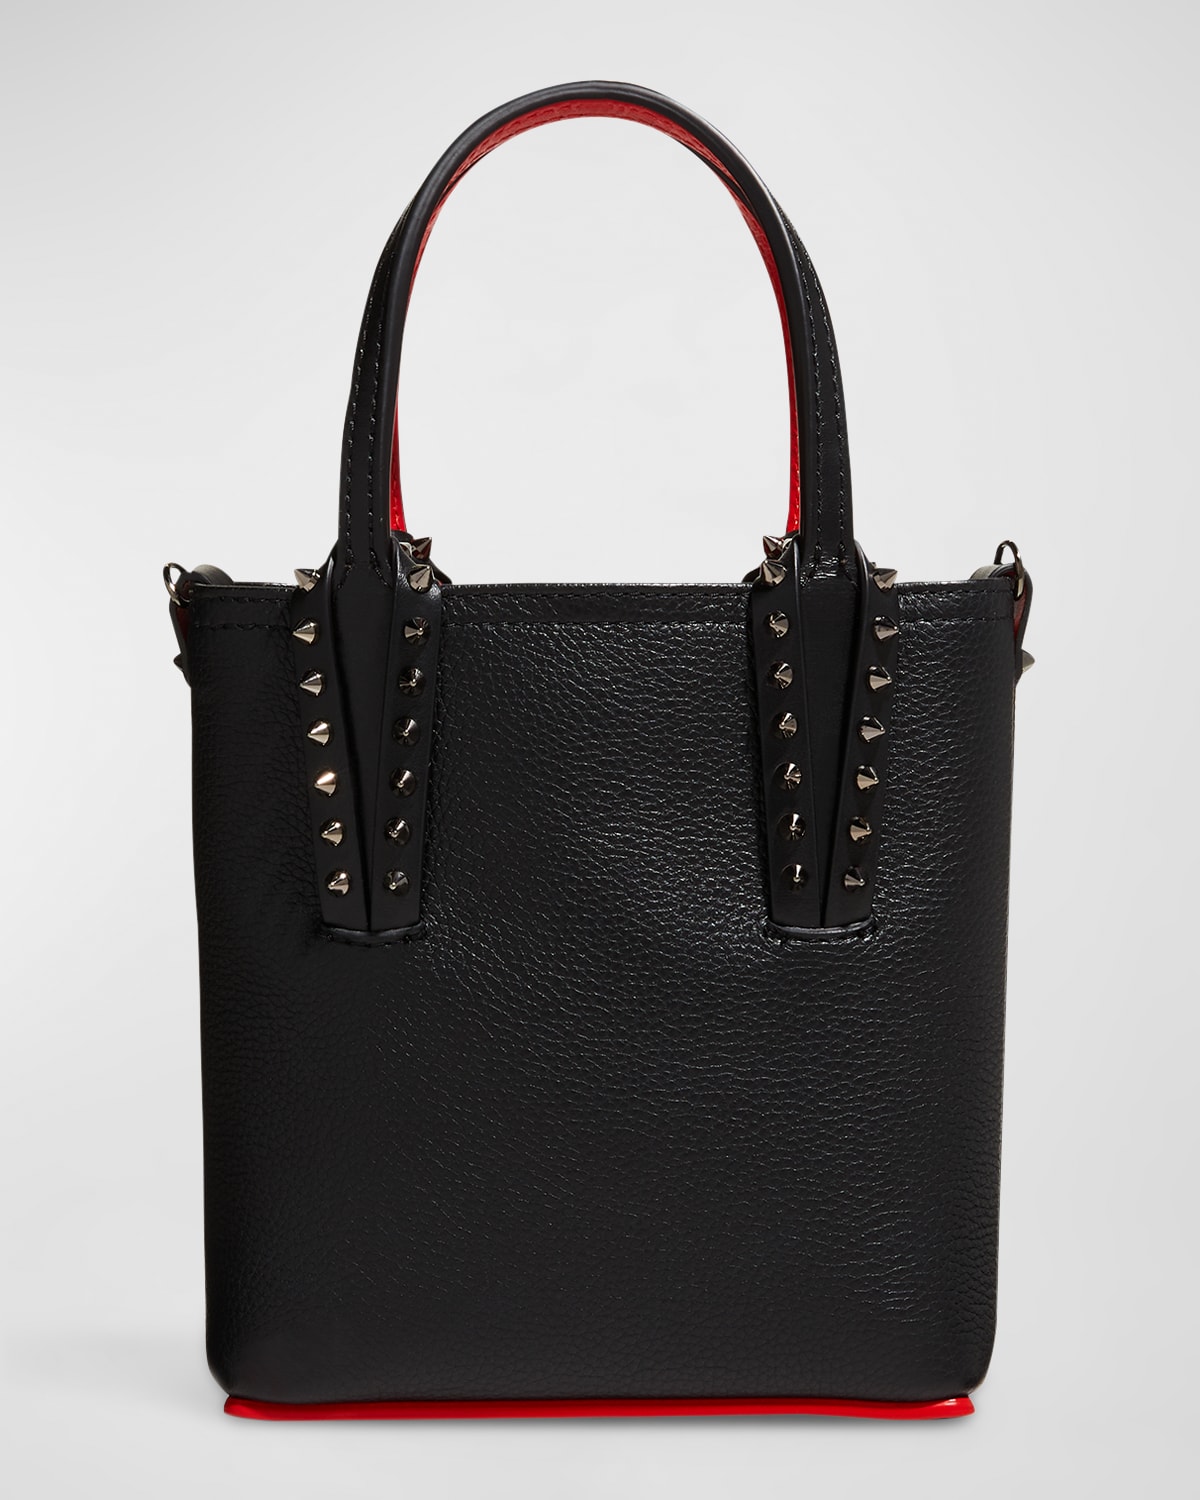 CHRISTIAN LOUBOUTIN CABATA N/S MINI TOTE IN GRAINED LEATHER,PROD235640130